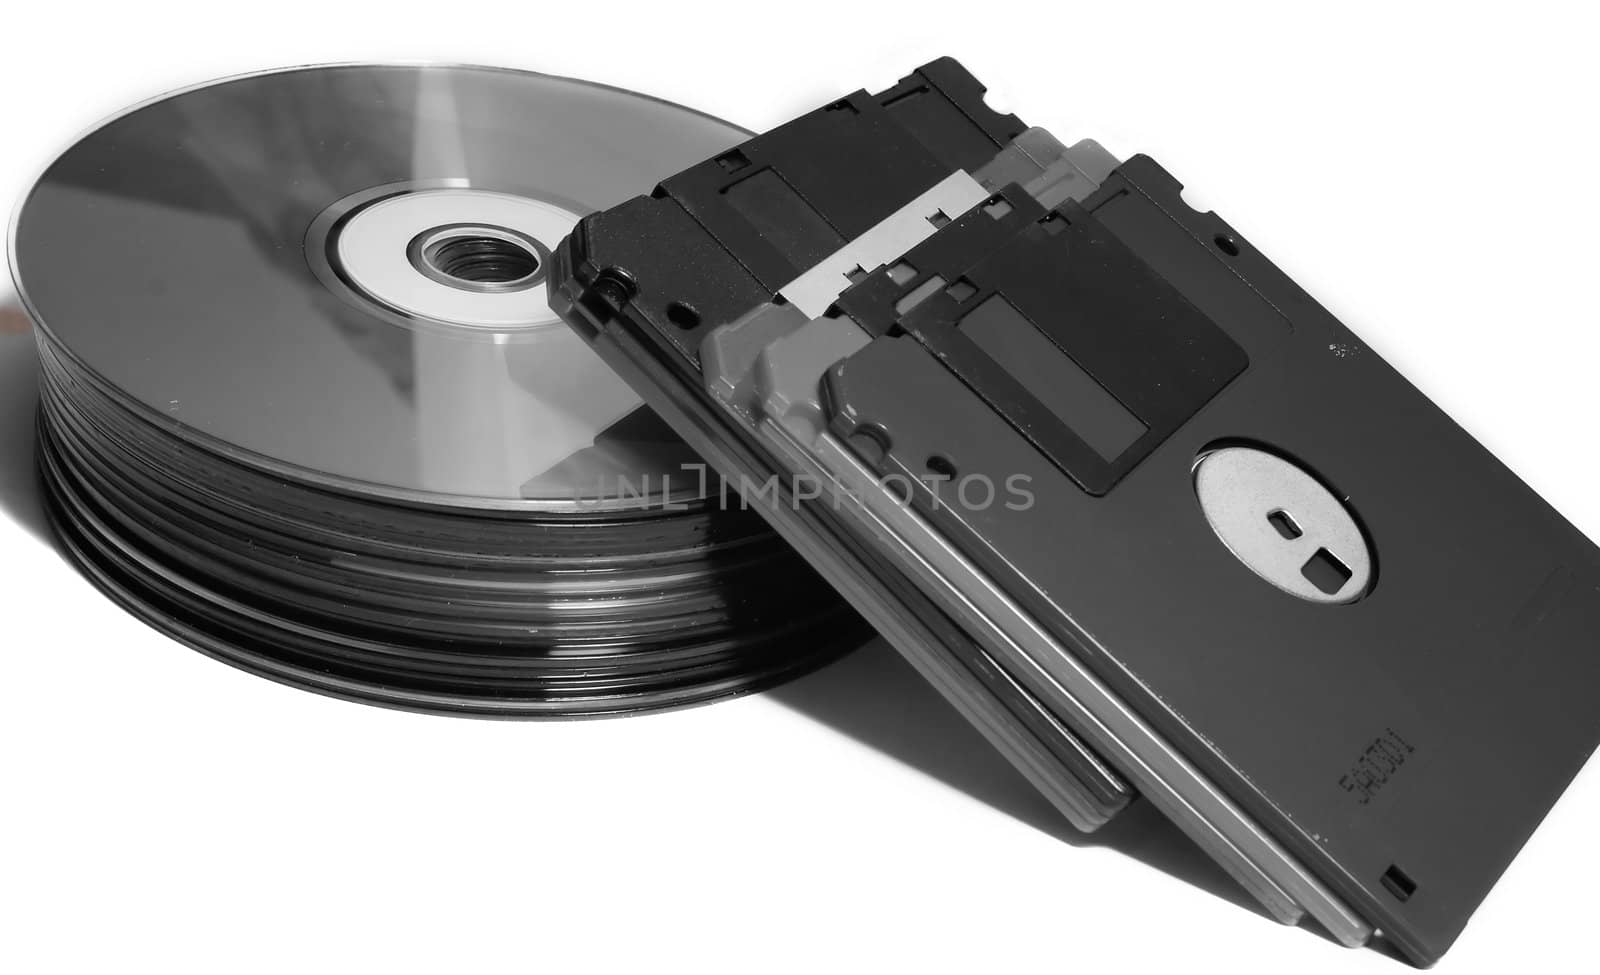 CD with diskettes on white background.